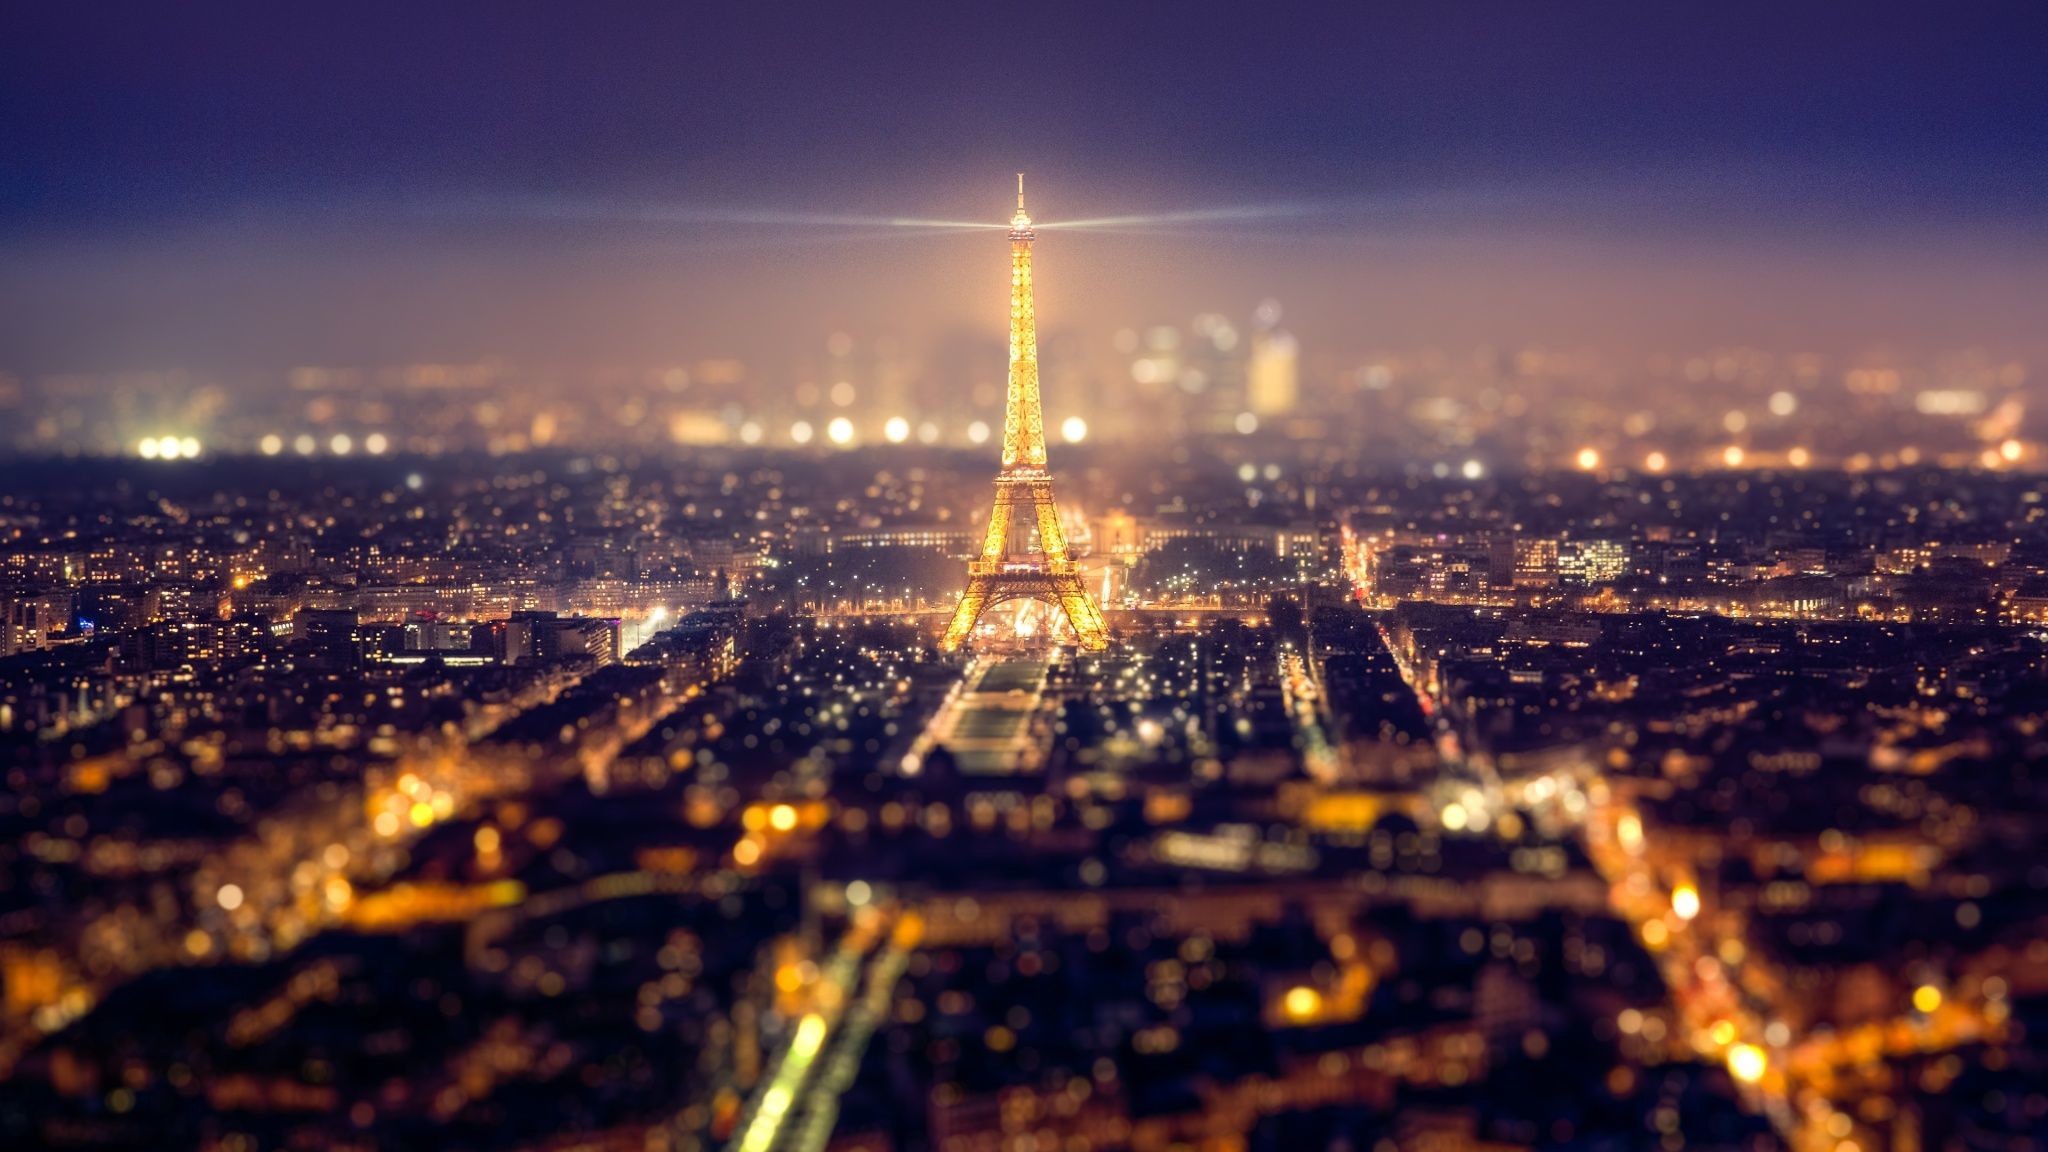 2048x1152 Paris At Night wallpaper Android Apps on Google Play